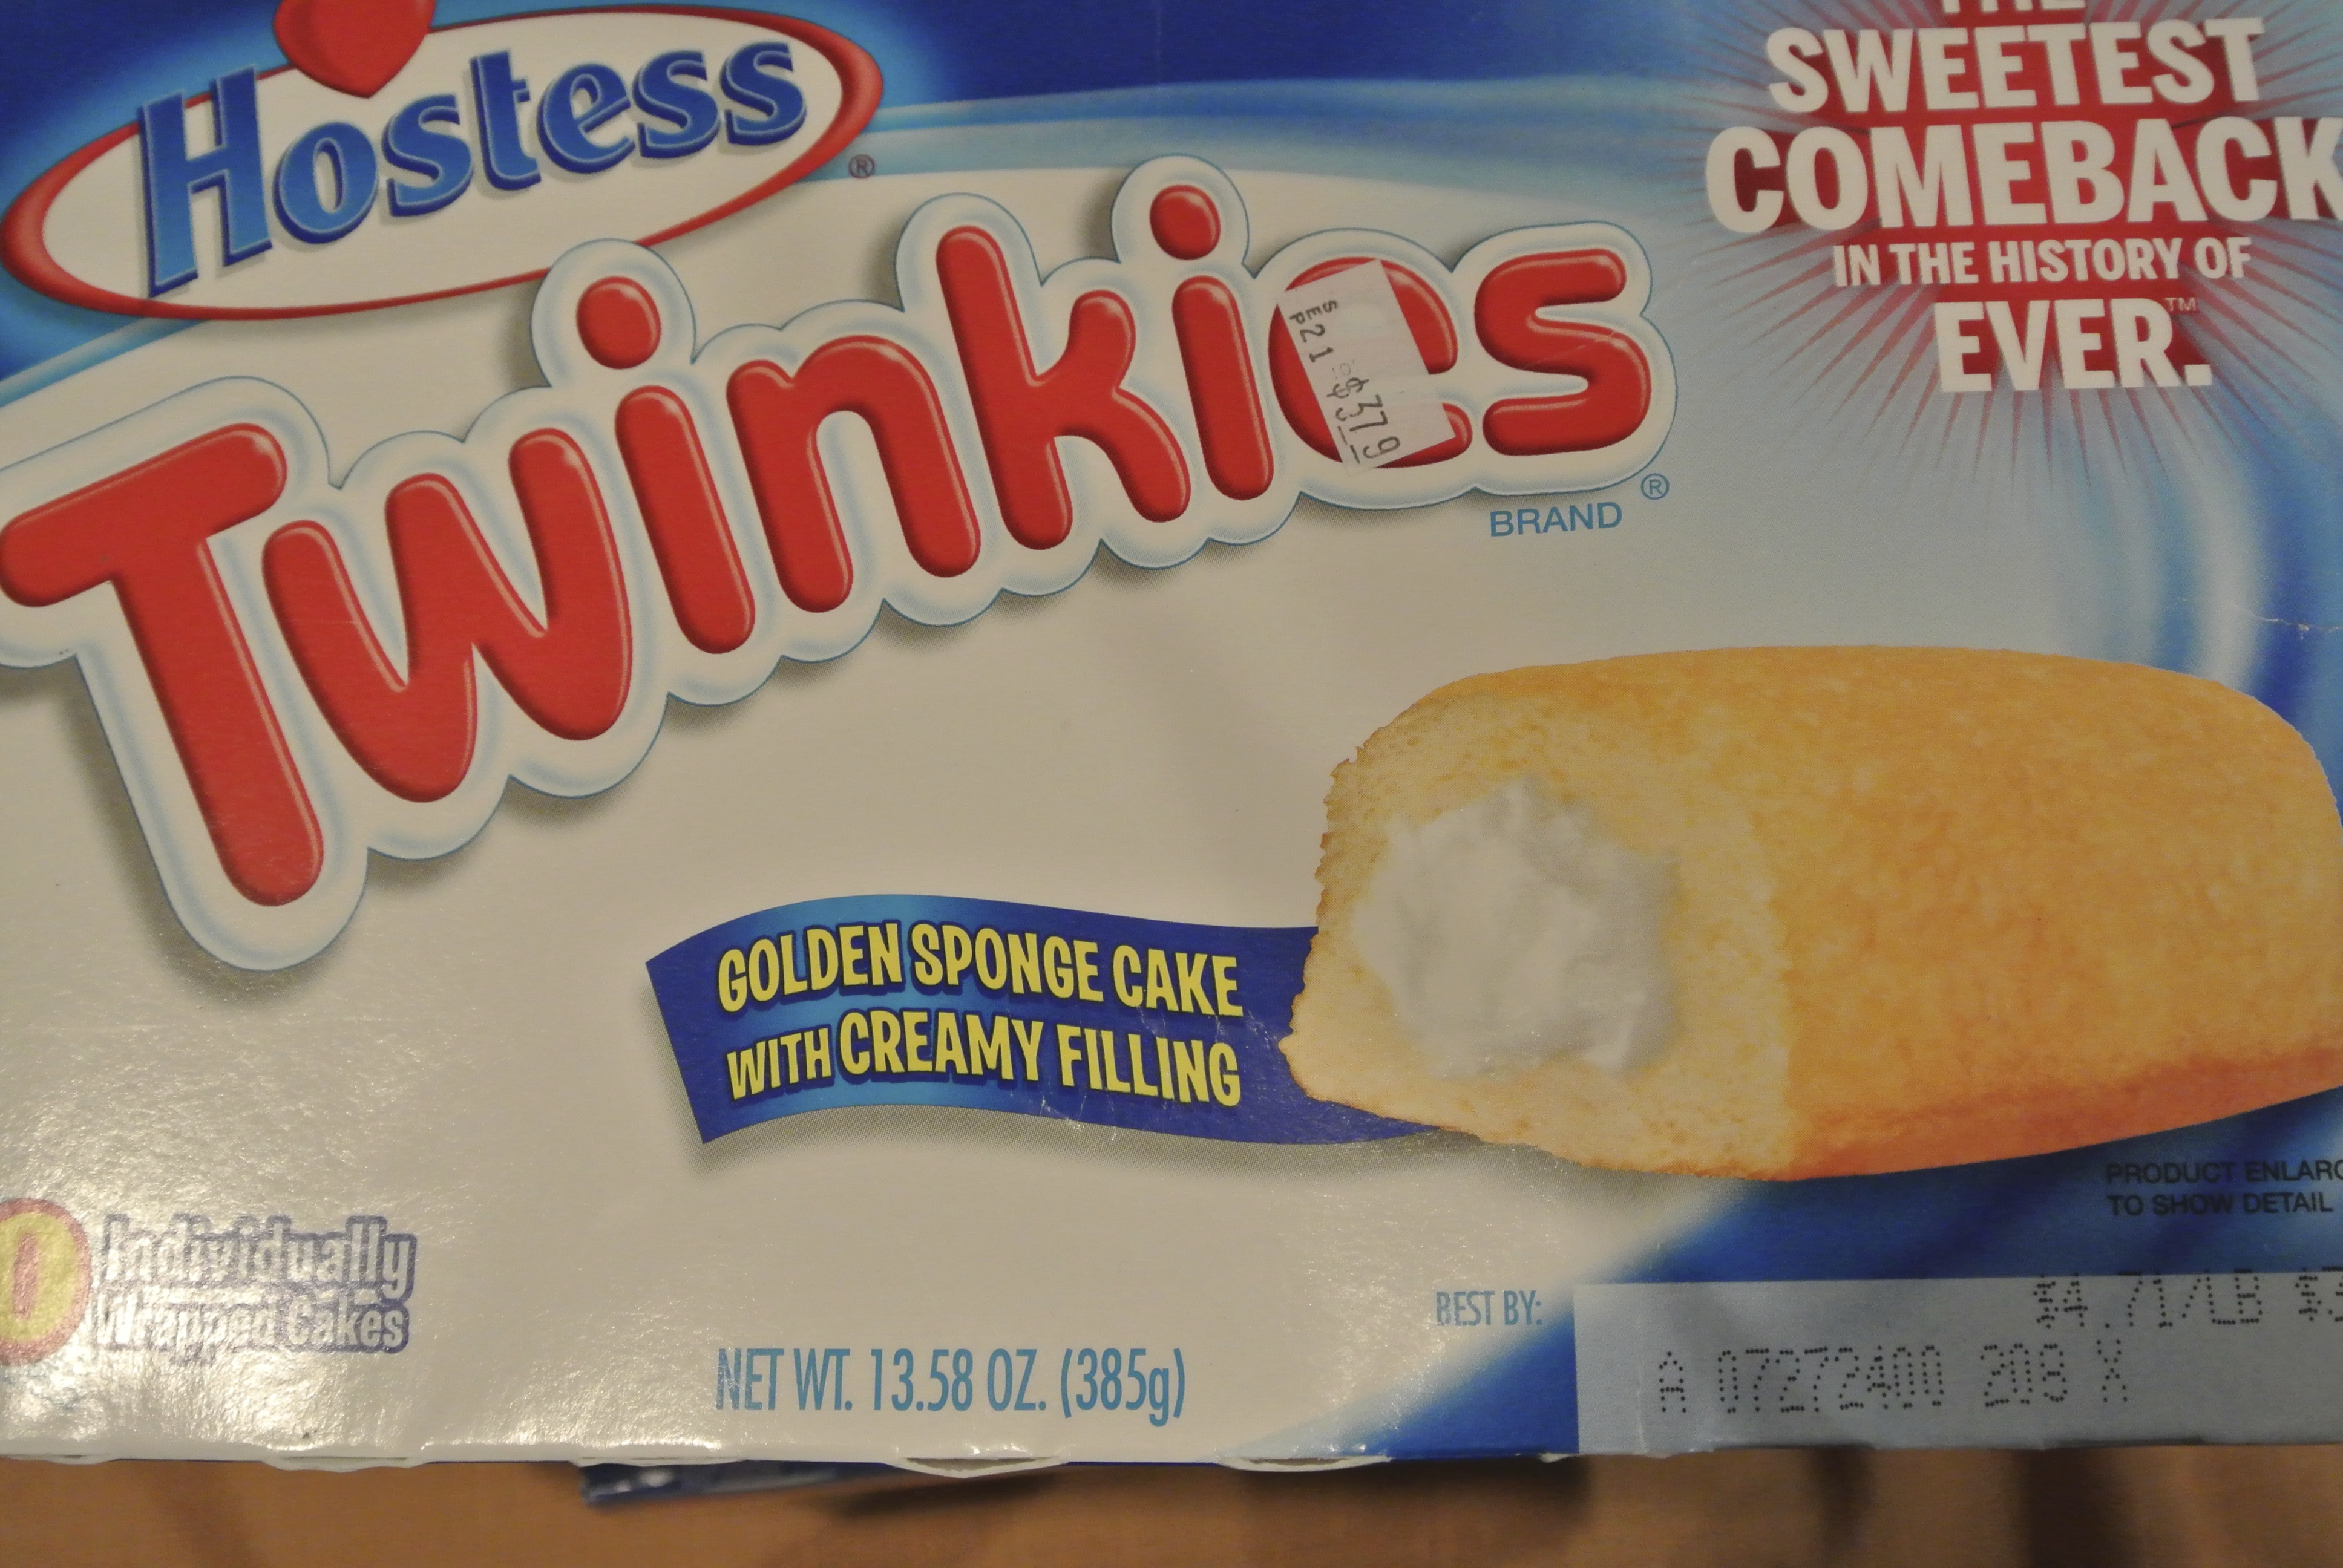 No More Twinkies? Hostess Brands Is Shutting Down : The Two-Way : NPR